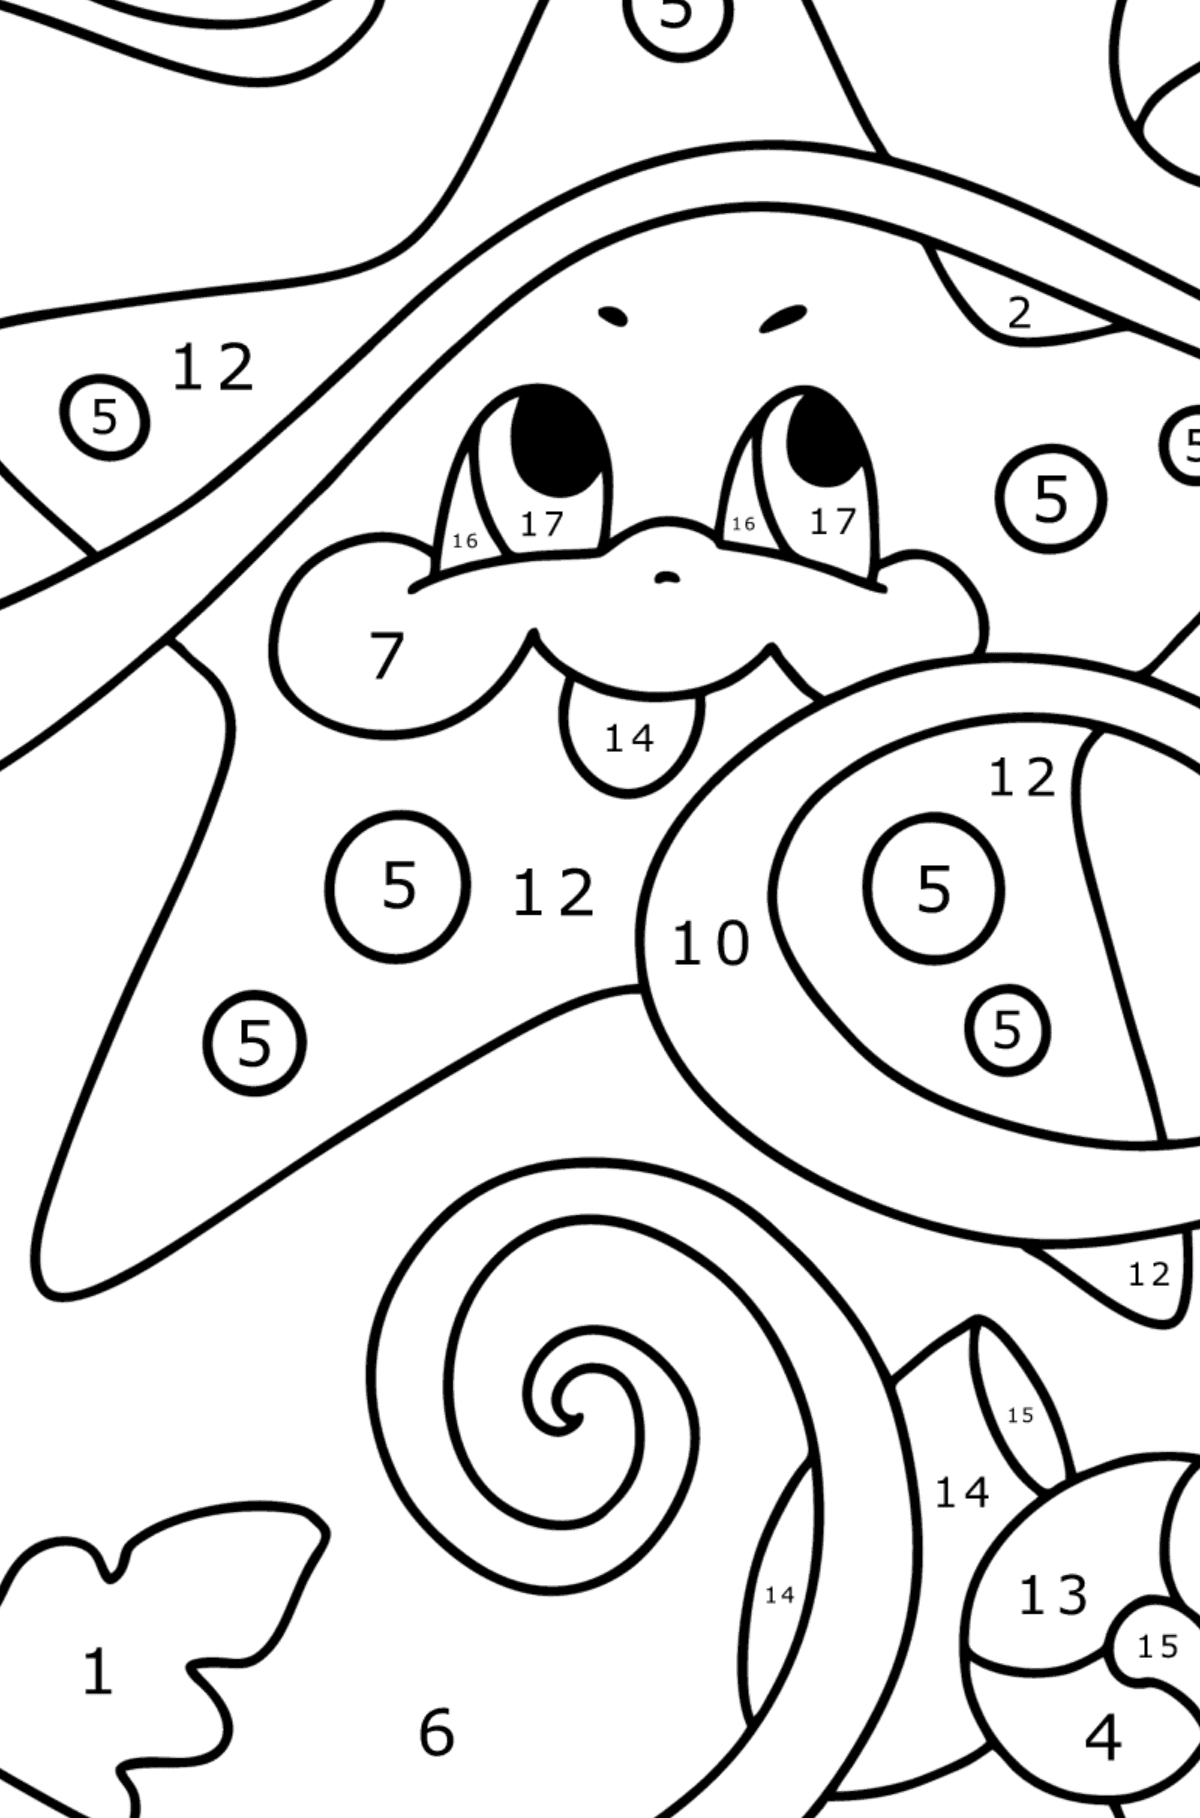 Baby starfish coloring page - Coloring by Numbers for Kids